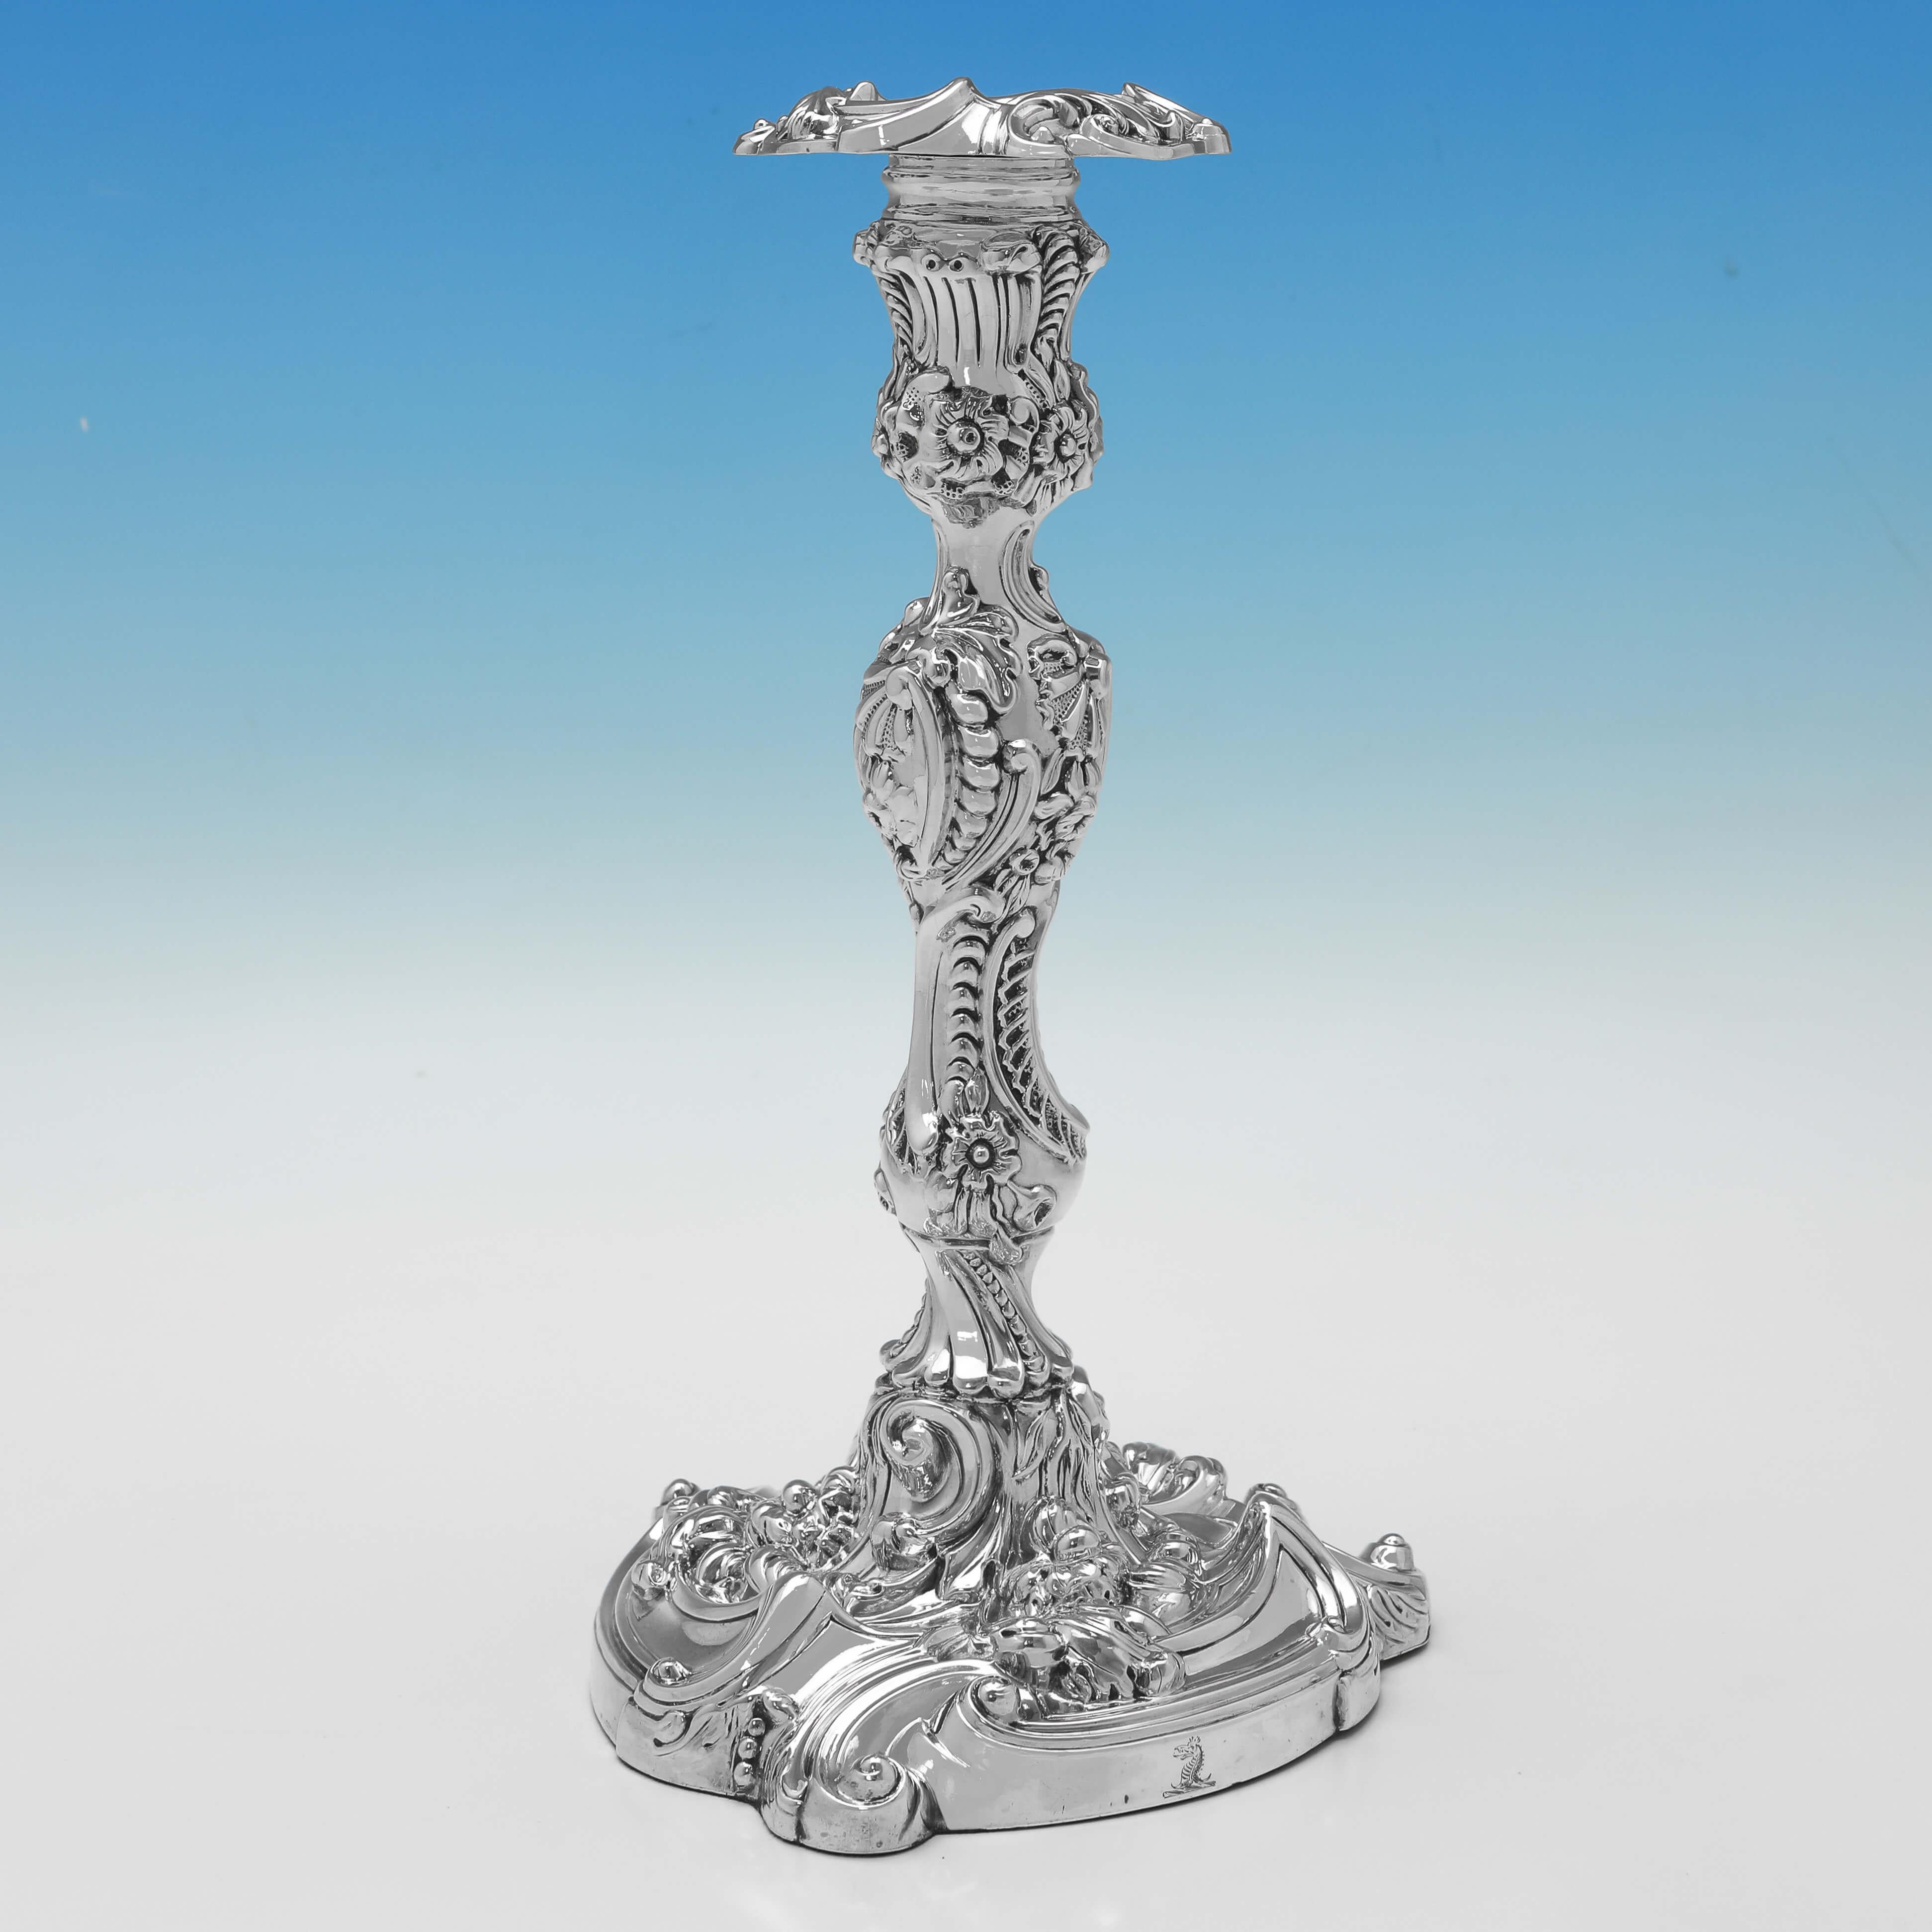 Hallmarked in Sheffield in 1816 by Kirkby Waterhouse & Co., this striking pair of Regency Period, Antique Sterling Silver Candlesticks, are richly decorated and have removable nozzles and engraved crests. 

Each candlestick measures 10.5